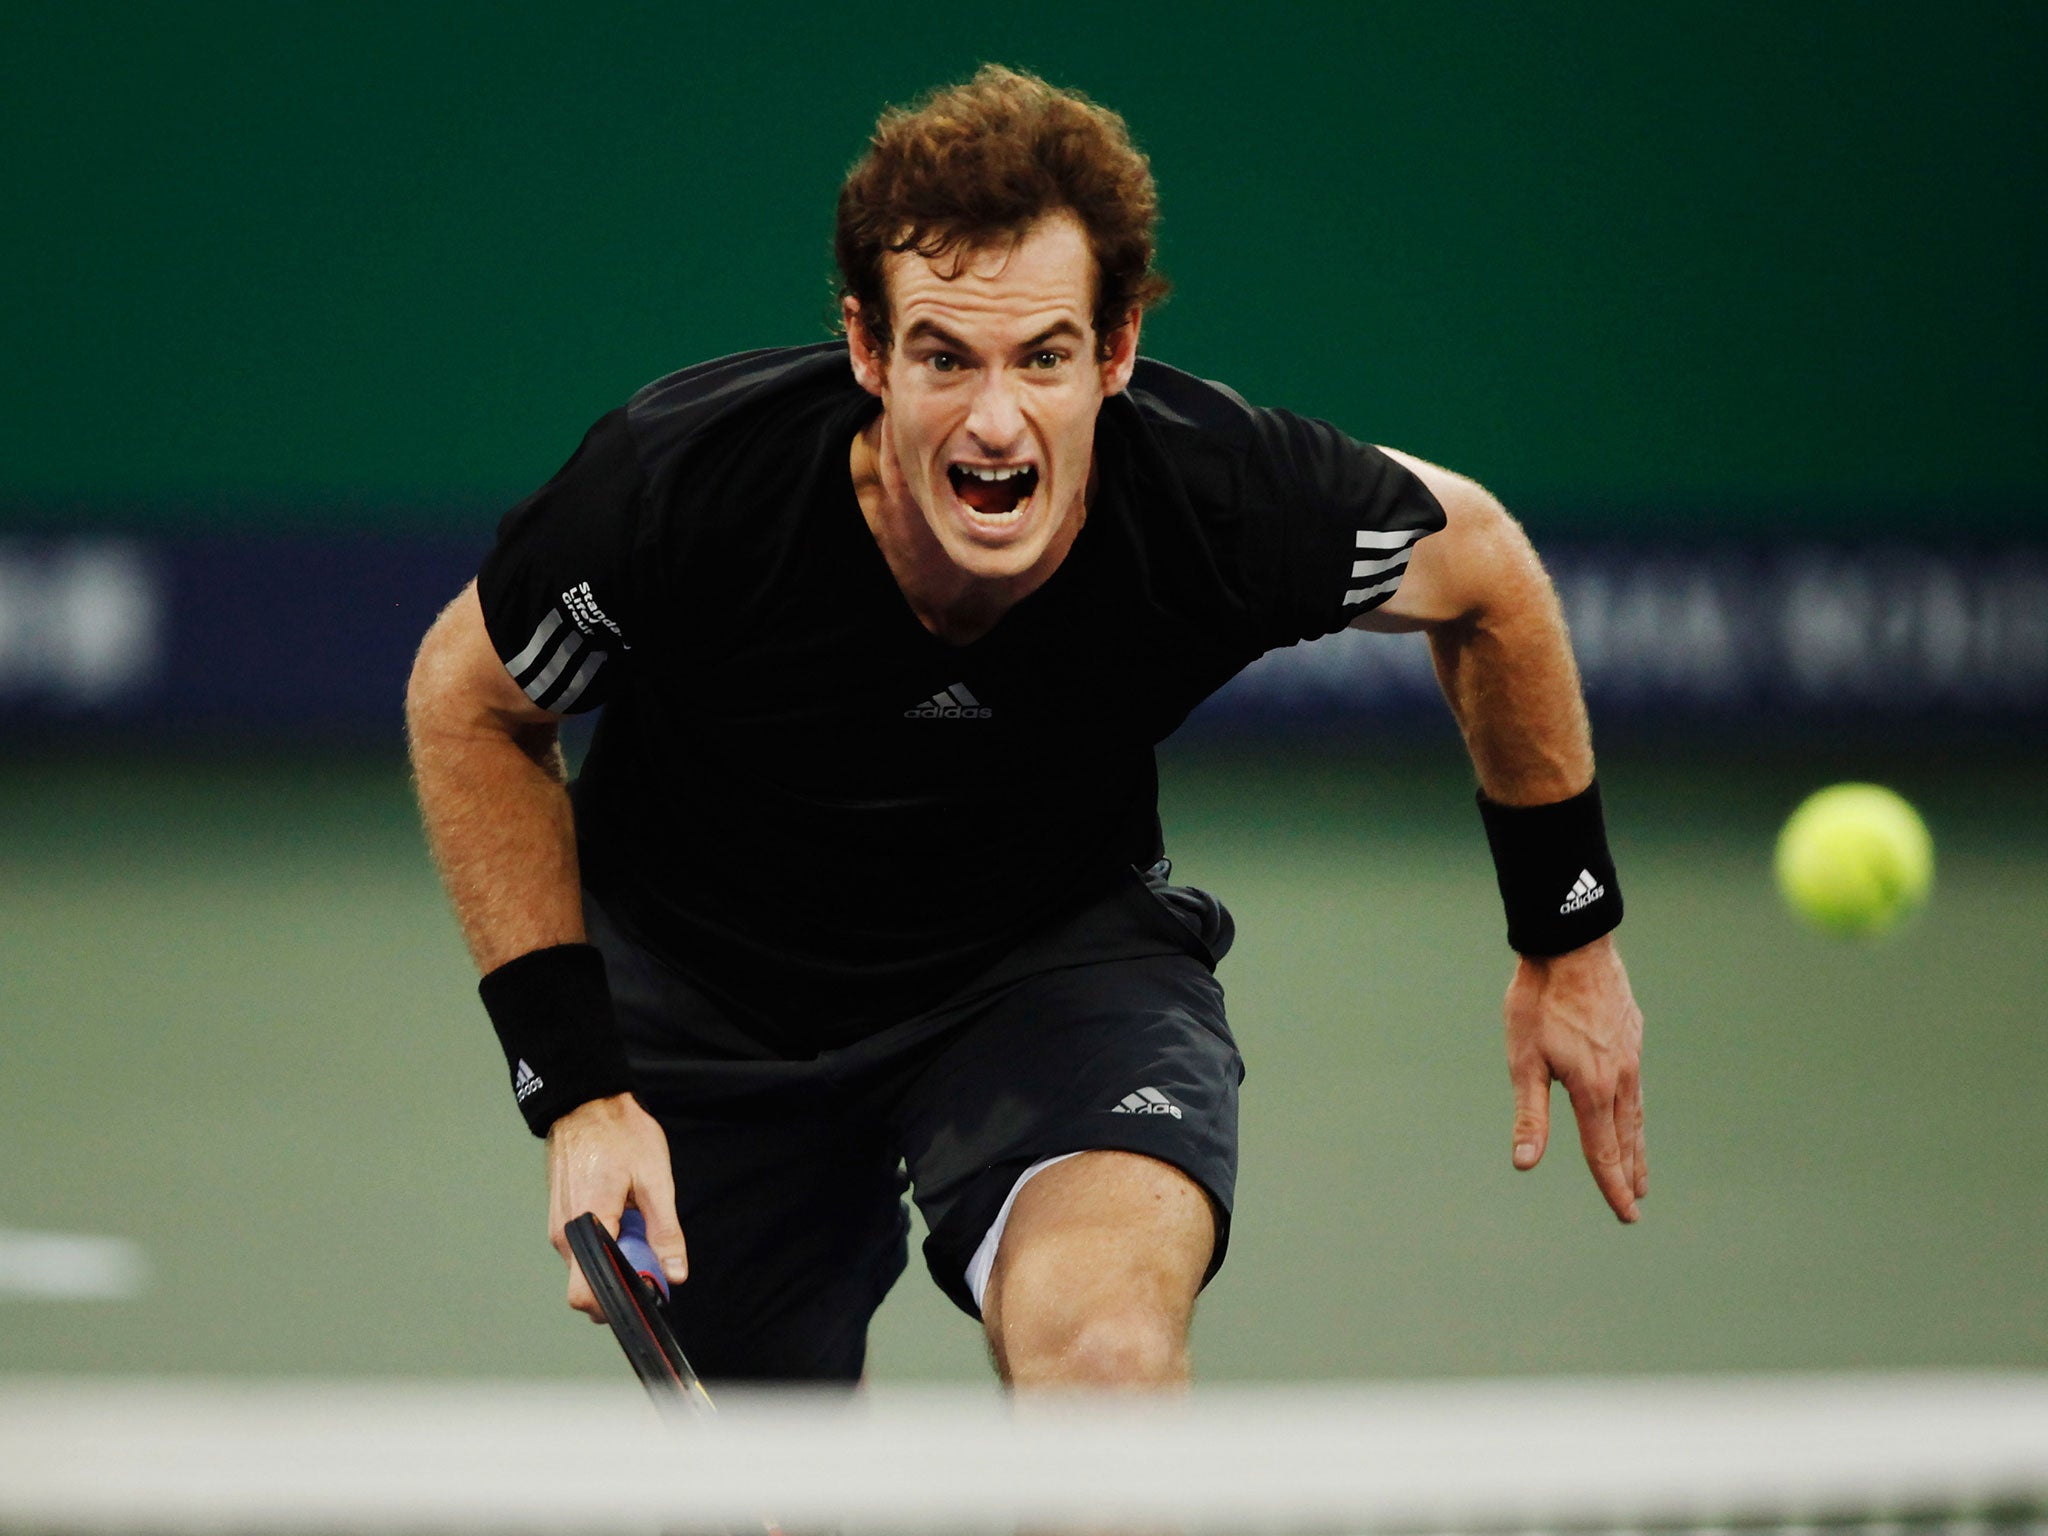 Andy Murray lost to David Ferrer 2-6 6-1 6-2 in the Shanghai Masters third round